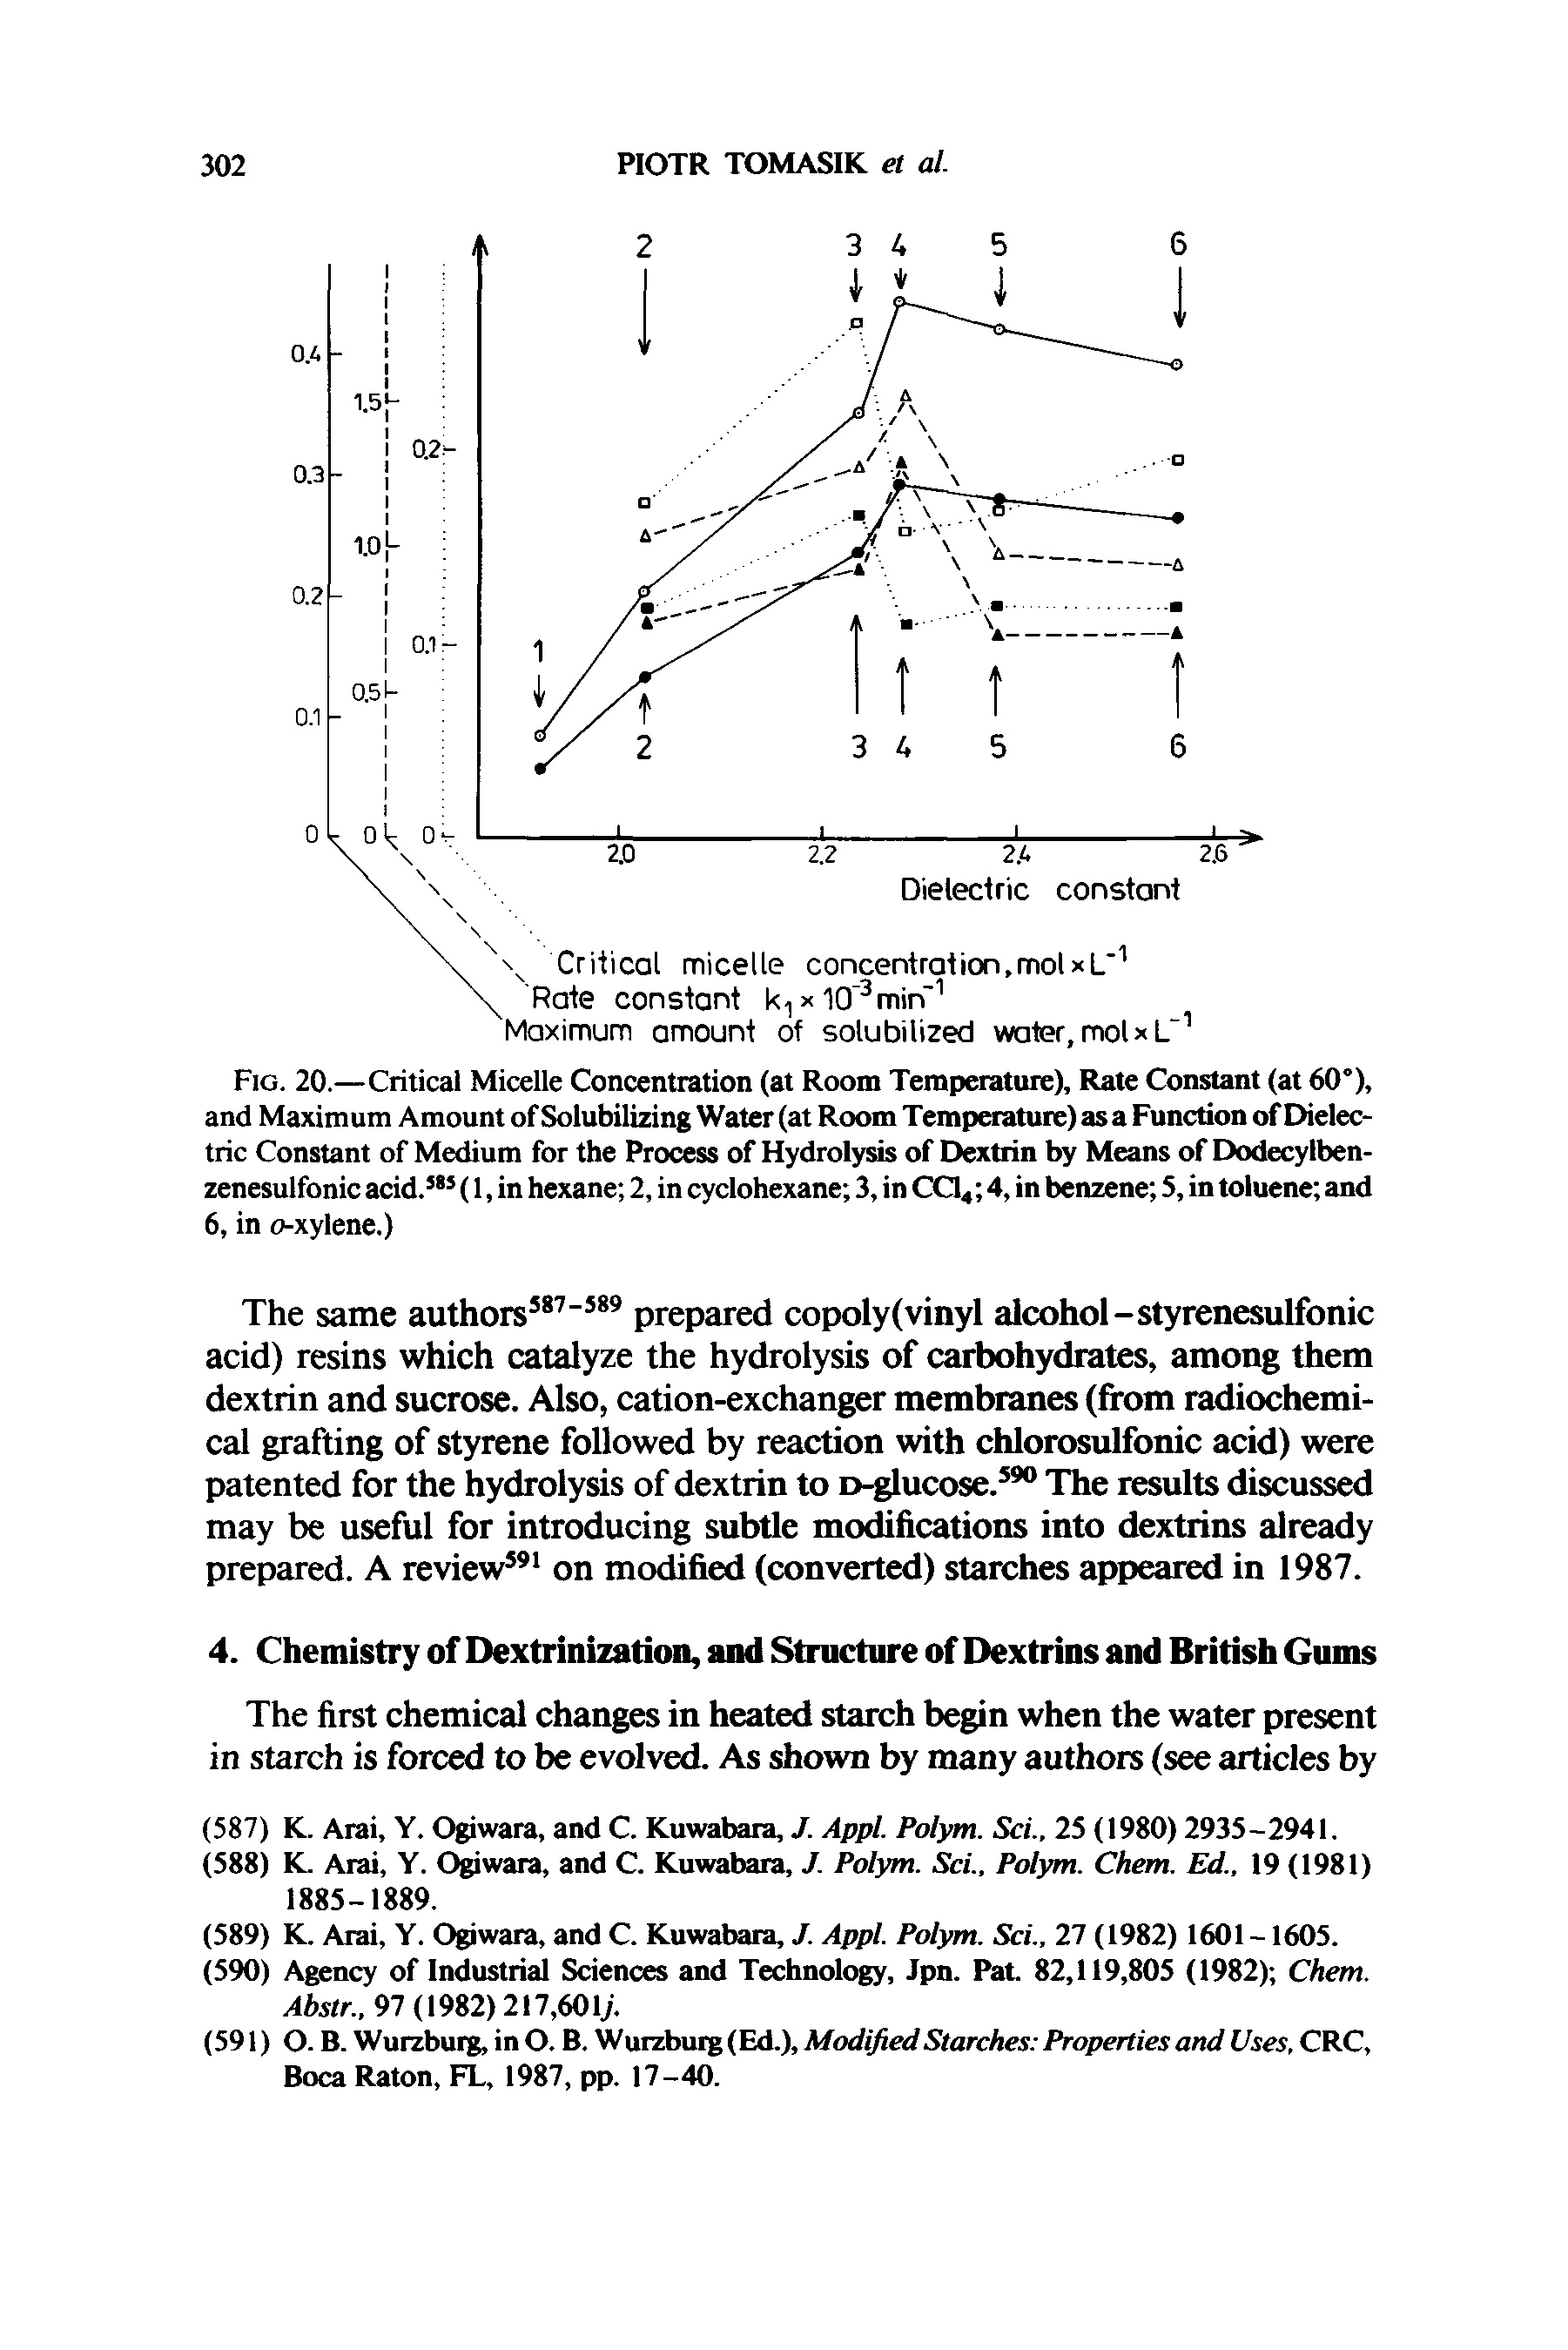 Fig. 20.—Critical Micelle Concentration (at Room Temperature), Rate Constant (at 60°), and Maximum Amount of Solubilizing Water (at Room Temperature)asa Function of Dielectric Constant of Medium for the Process of Hydrolysis of Elextrin by Means of Dodecylben-zenesulfonic acid. (1, in hexane 2, in cyclohexane 3, in CCI4 4, in benzene S, in toluene and 6, in o-xylene.)...